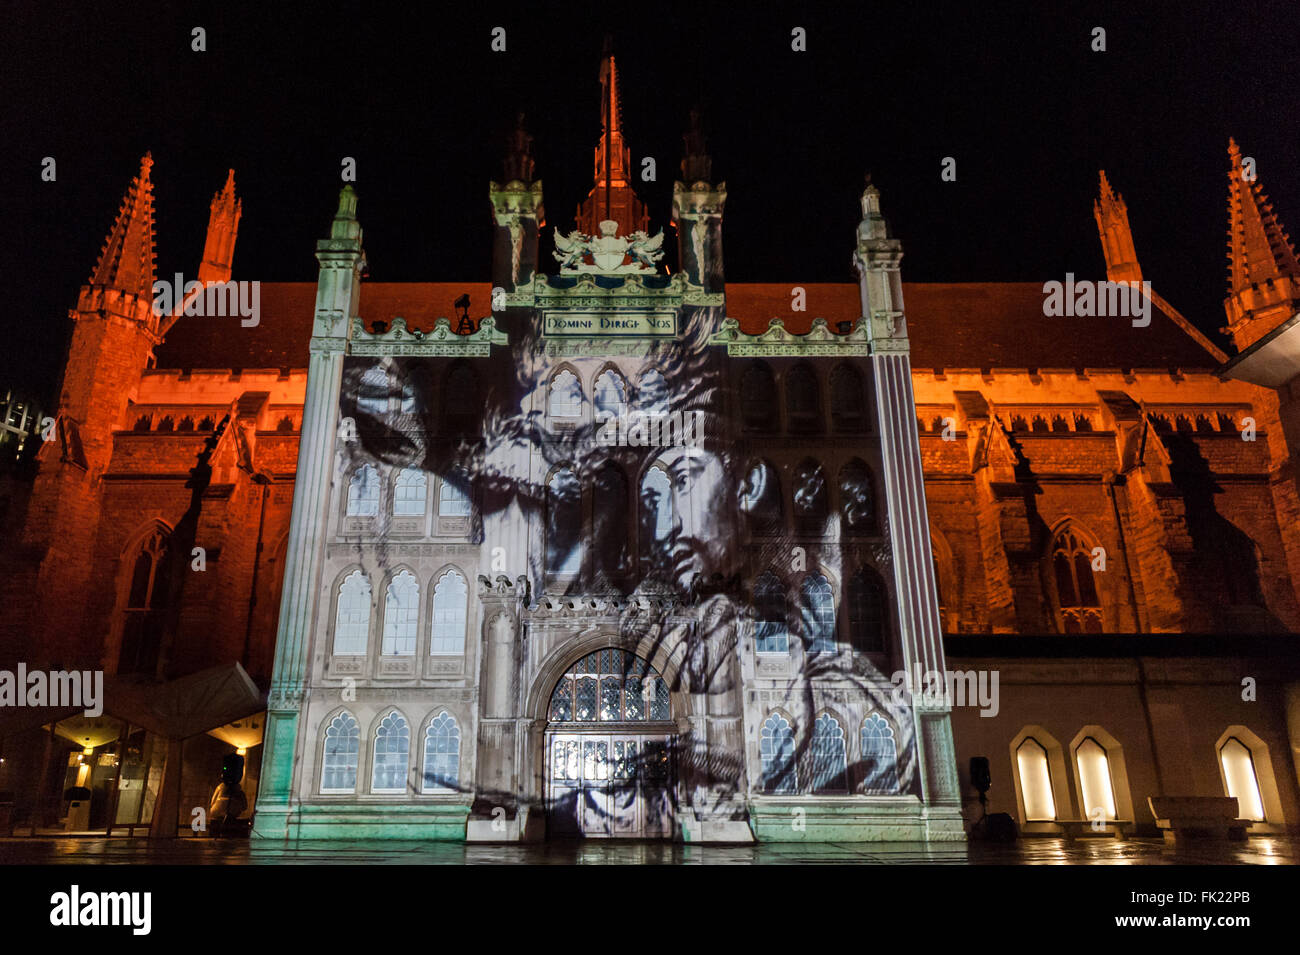 London, UK.  5 March 2016.  Visitors gather to watch the 'Son et Lumière' at Guildhall.  The spectacular light and sound production celebrates the City of London's connection to Shakespeare, on the 400th anniversary of his death.  The historic façade of Guildhall is brought to life with 3D projection mapping technology accompanied by a special music composition by the Guildhall School of Music & Drama. Credit:  Stephen Chung / Alamy Live News Stock Photo